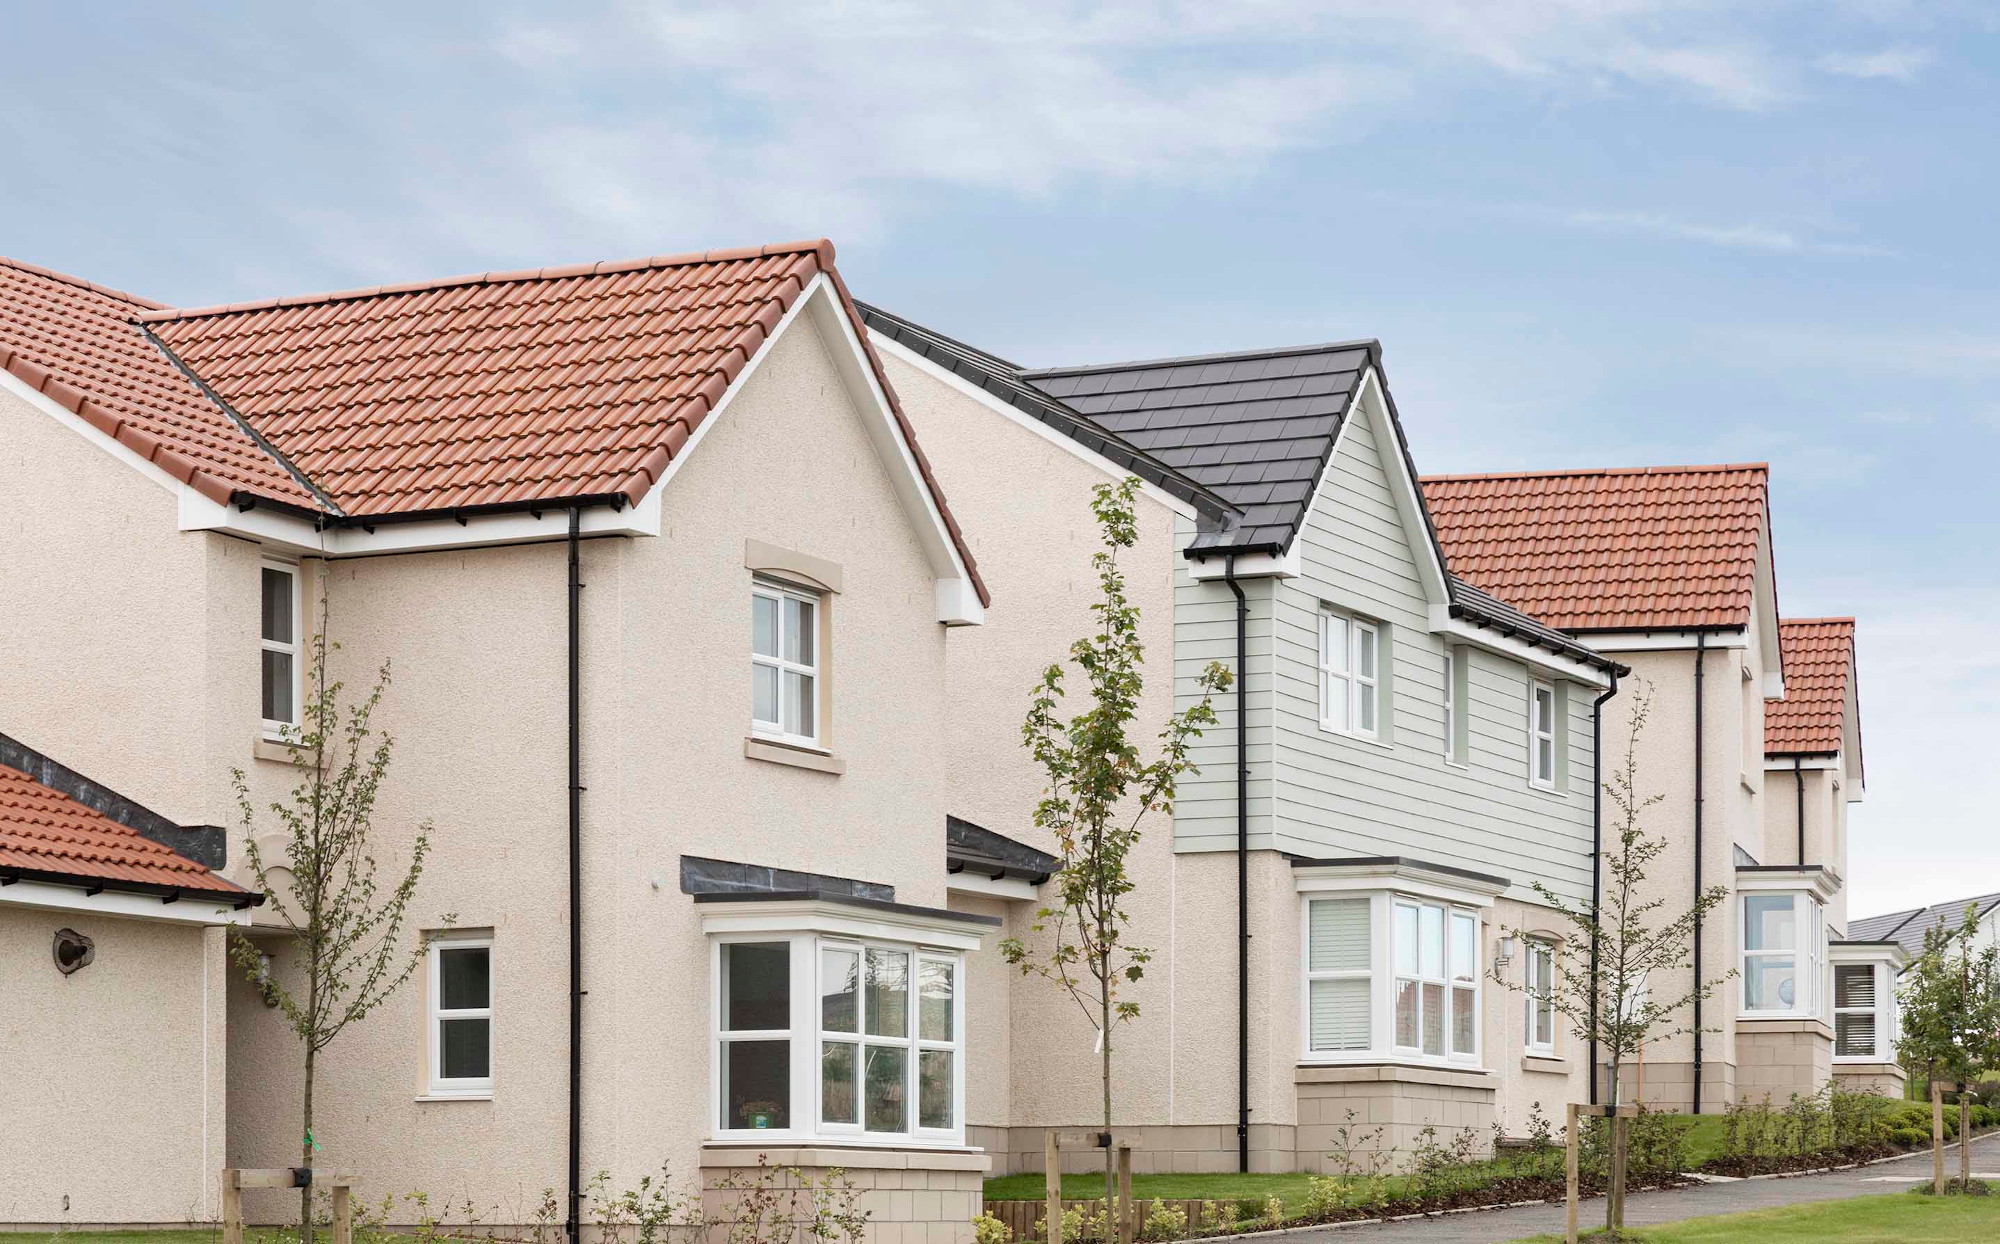 Miller Homes to consult second time on Kinross proposals